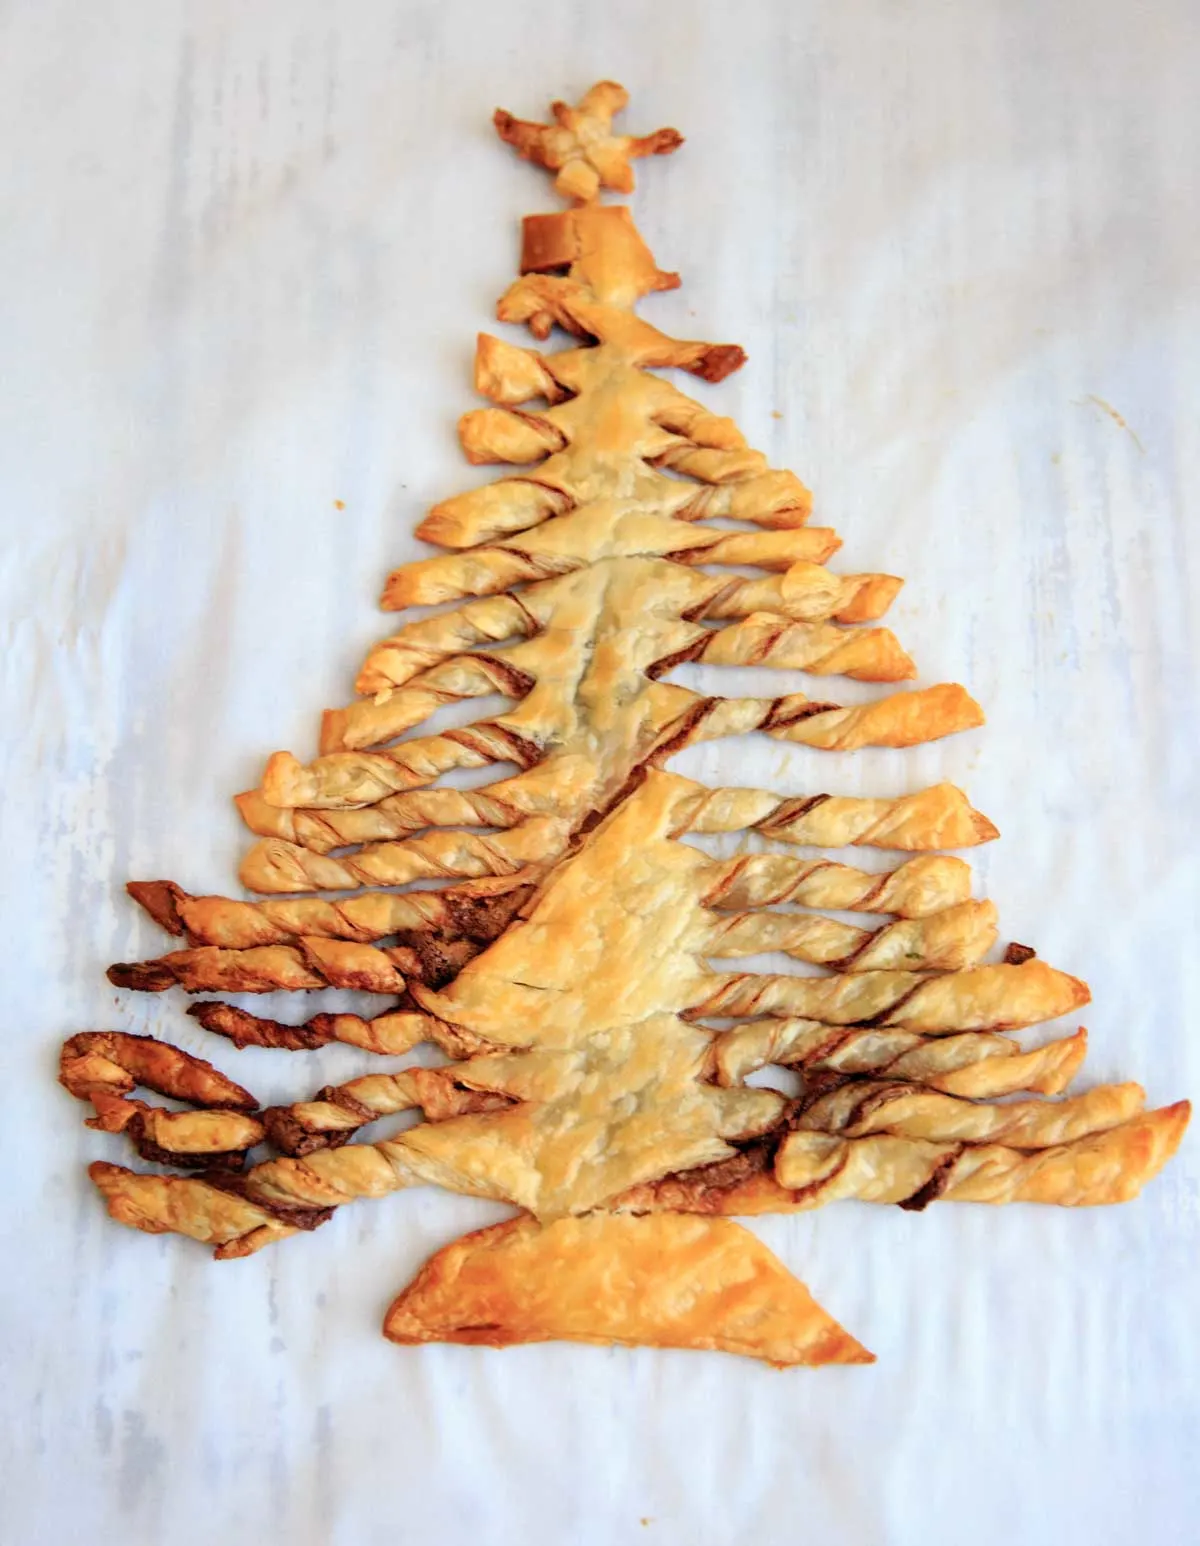 The Nutella and peanut butter puff pastry Christmas tree dessert, after baking